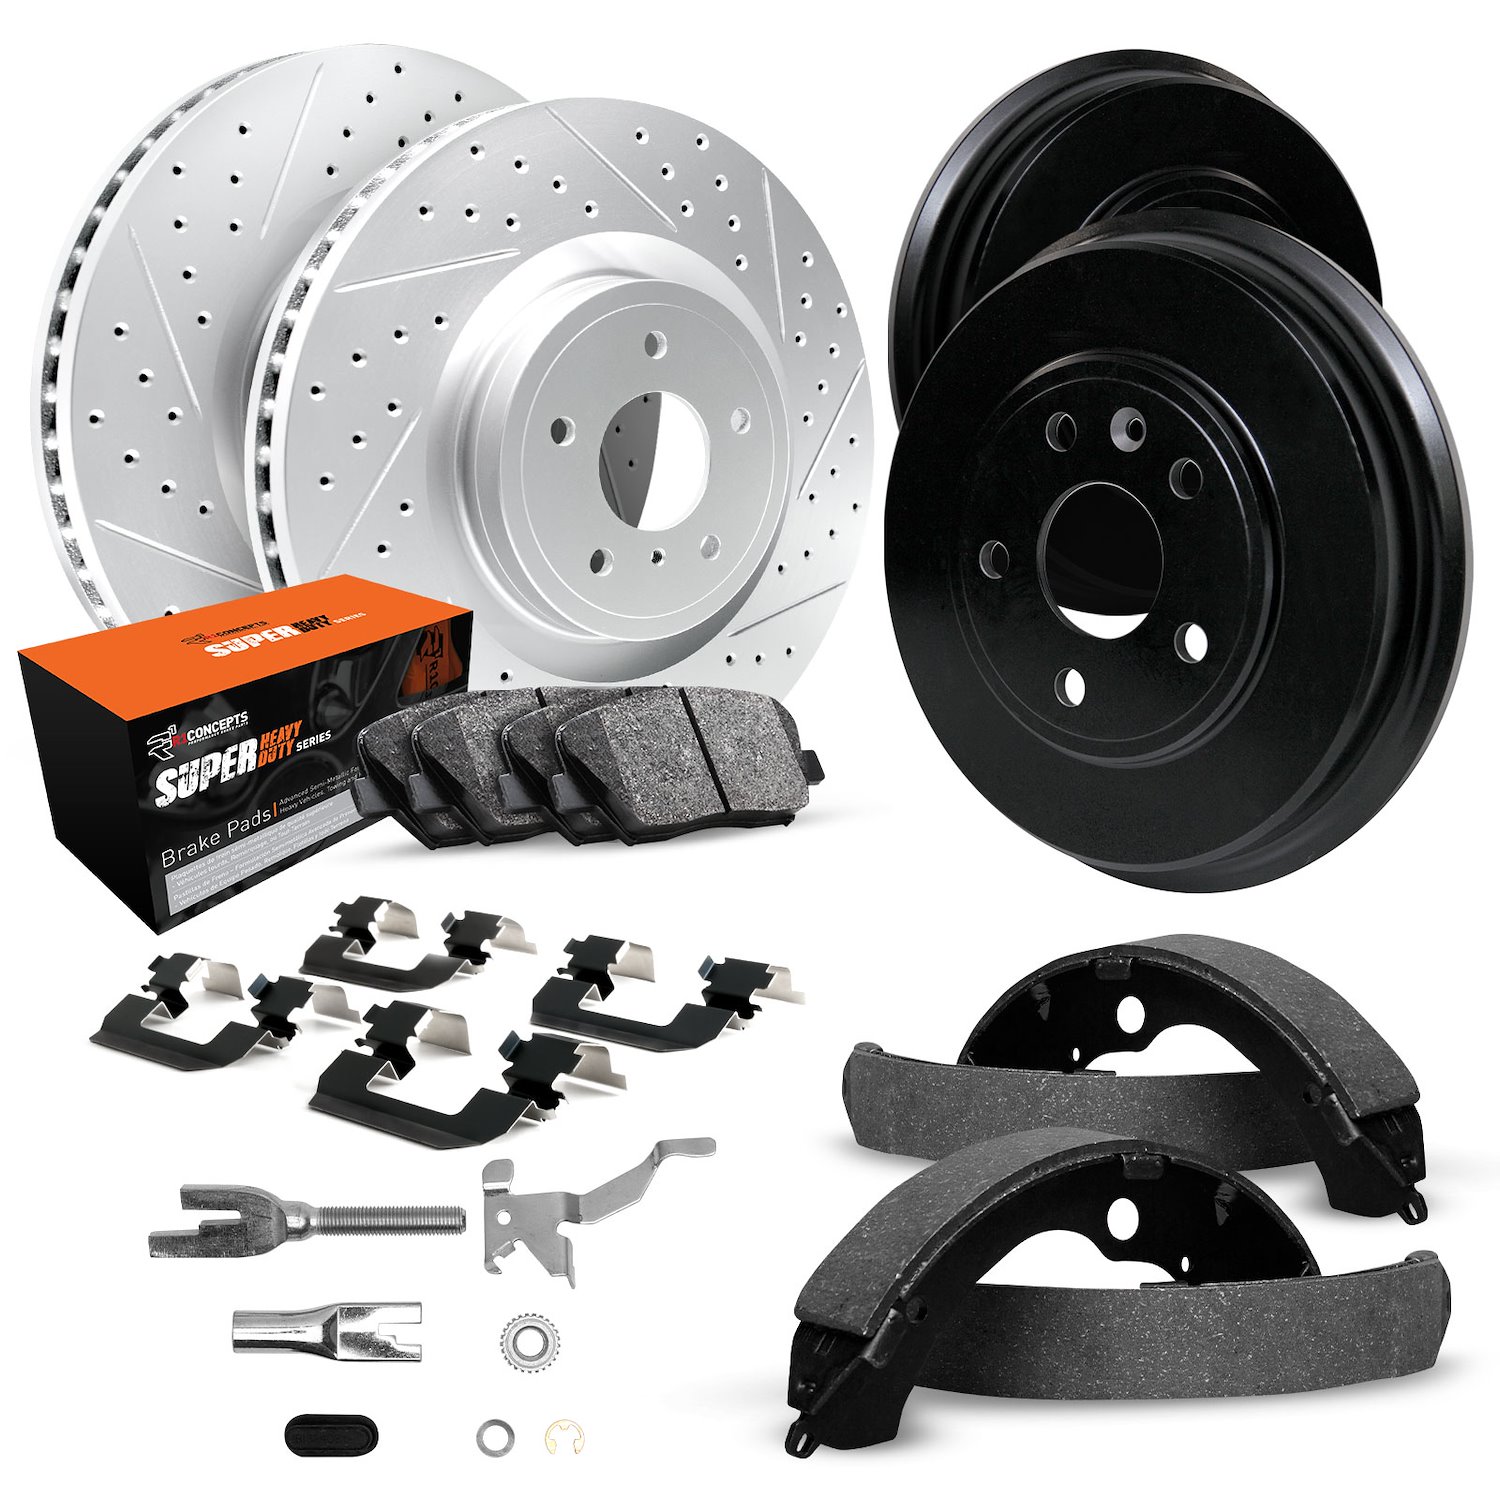 GEO-Carbon Drilled/Slotted Rotors/Drums w/Super-Duty Pads/Shoes/Hardware/Adjusters, 1999-2006 Mopar, Position: Front/Rear